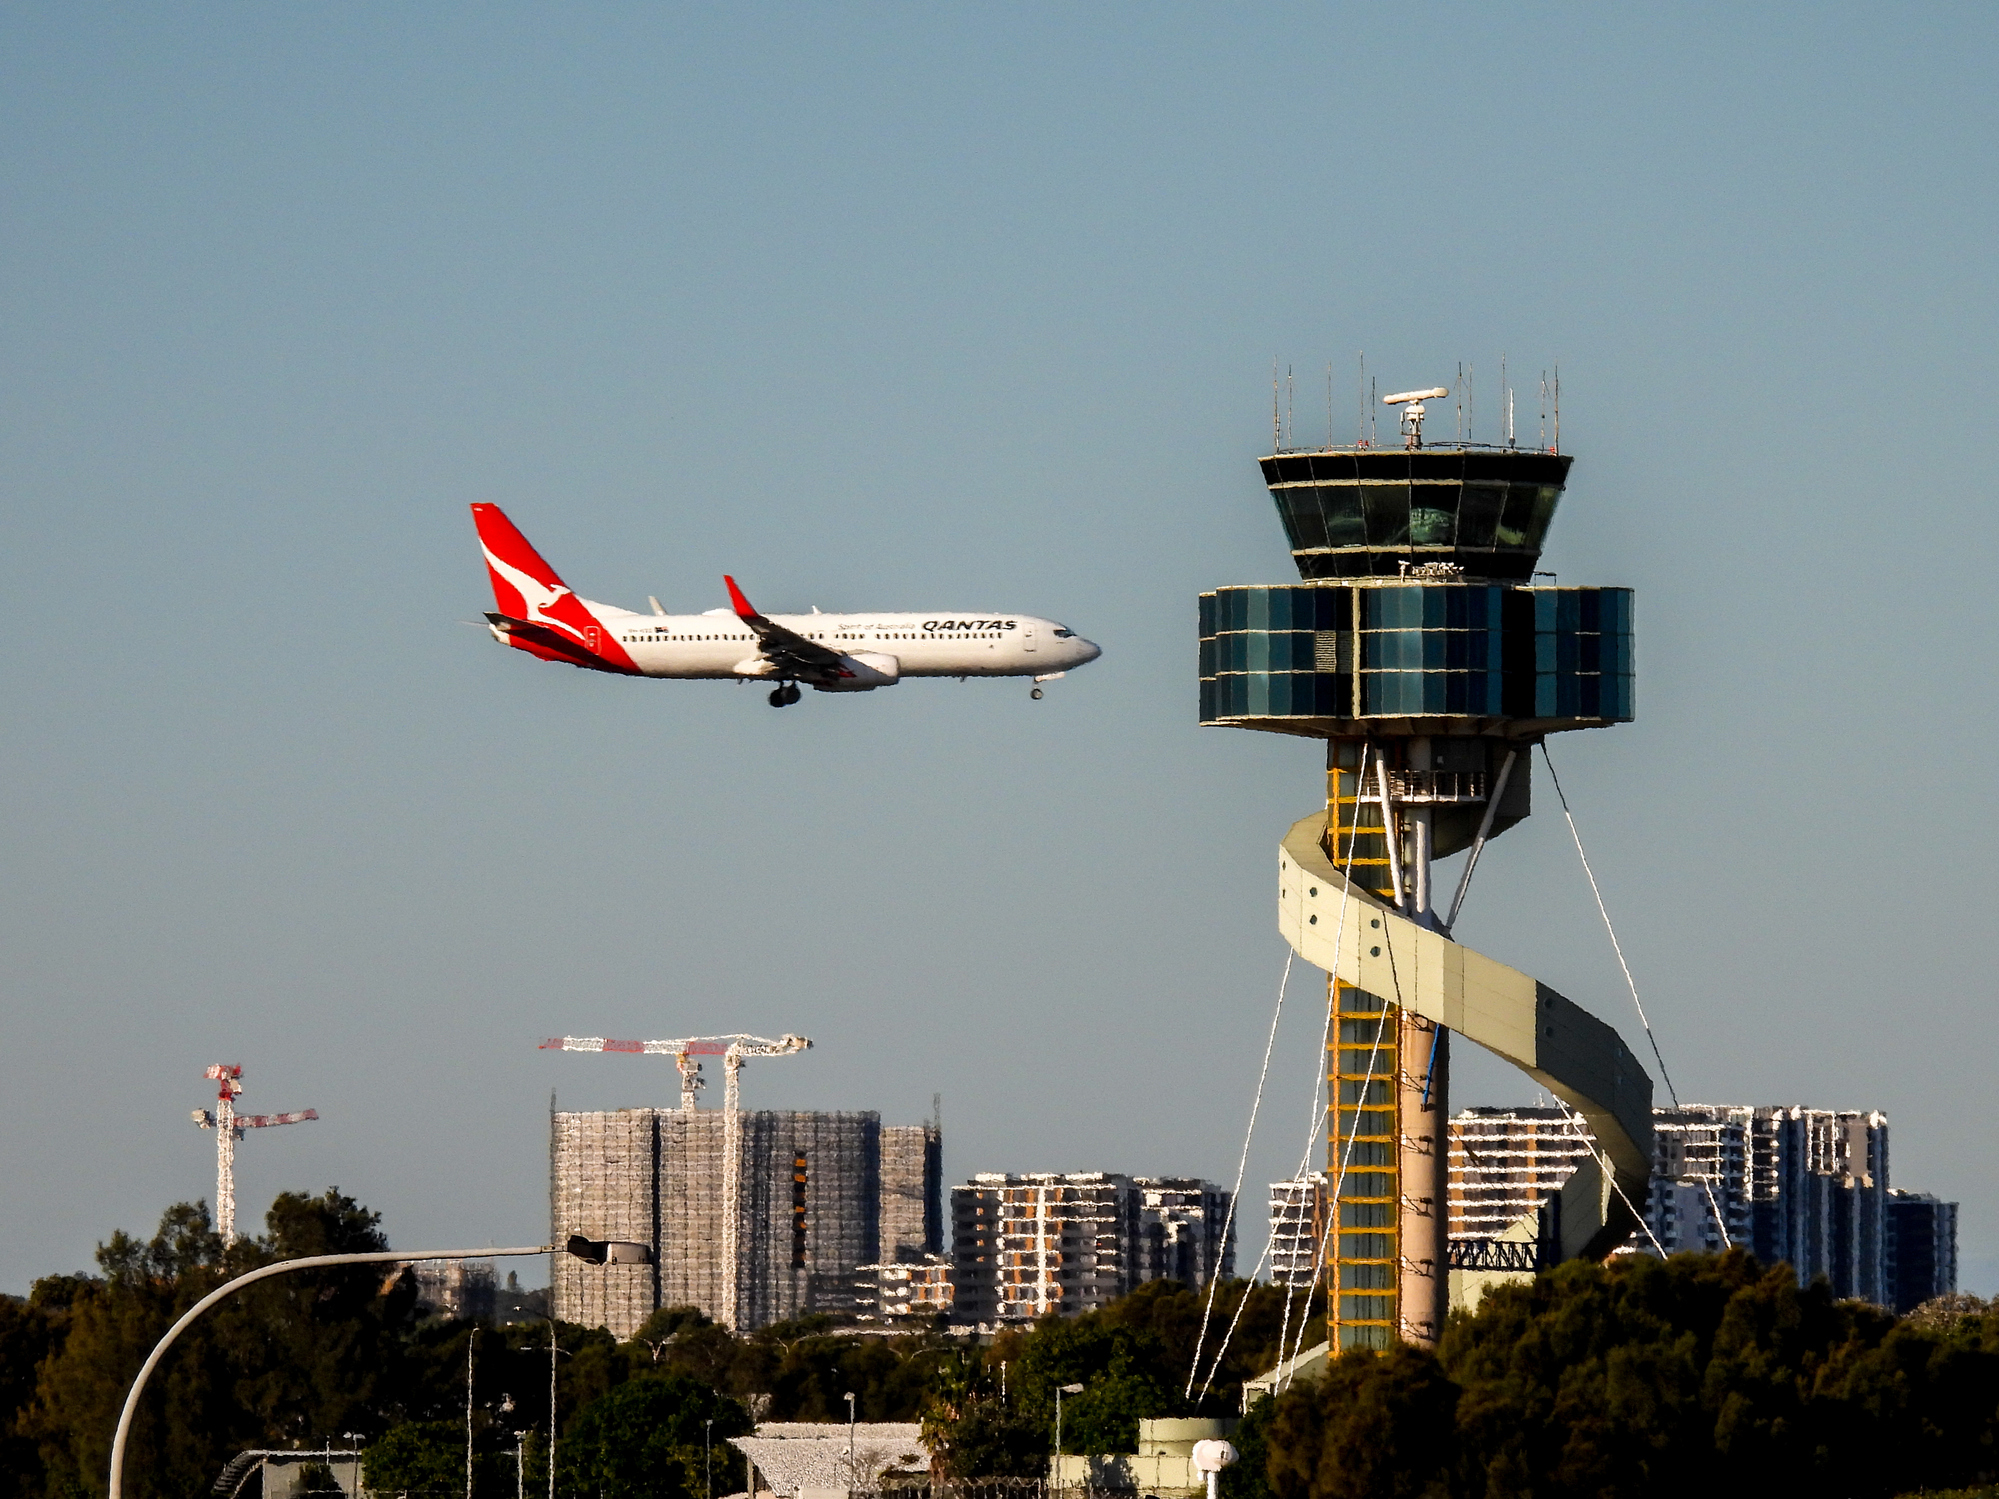 A Qantas plane is approaching Sydney Airport, with the striking airport tower further back.